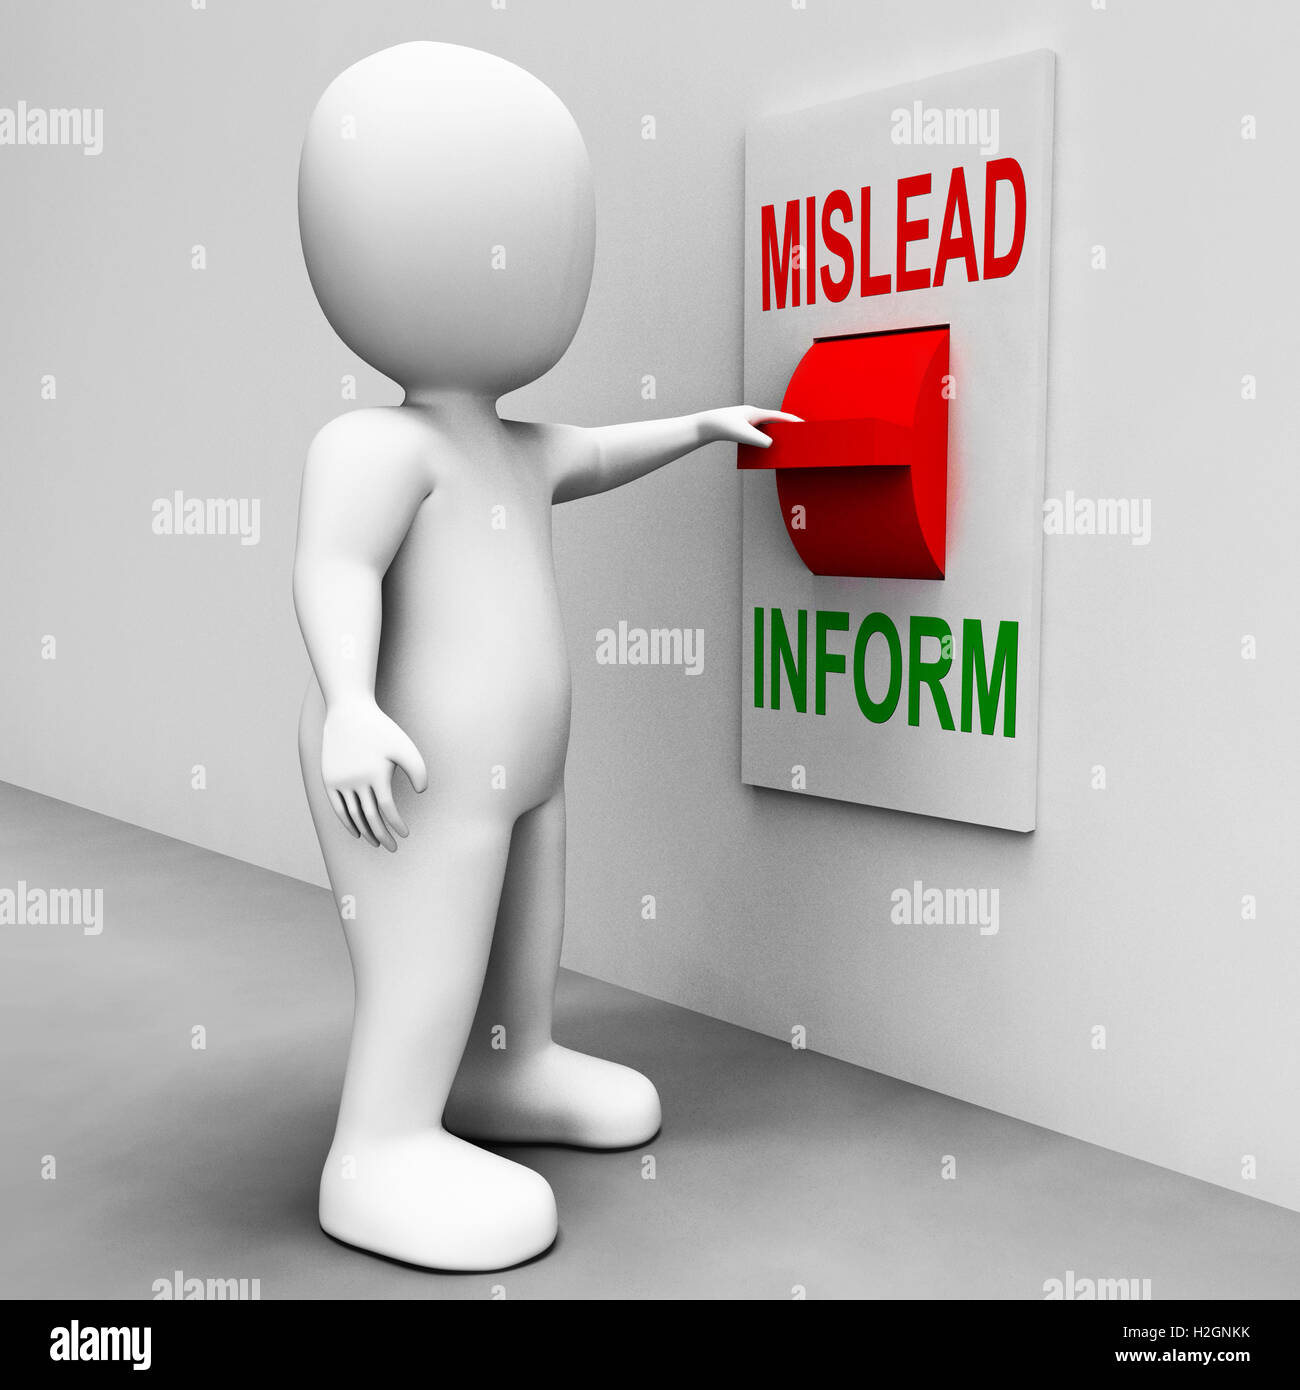 Mislead Inform Switch Shows Misleading Or Informative Advice Stock Photo